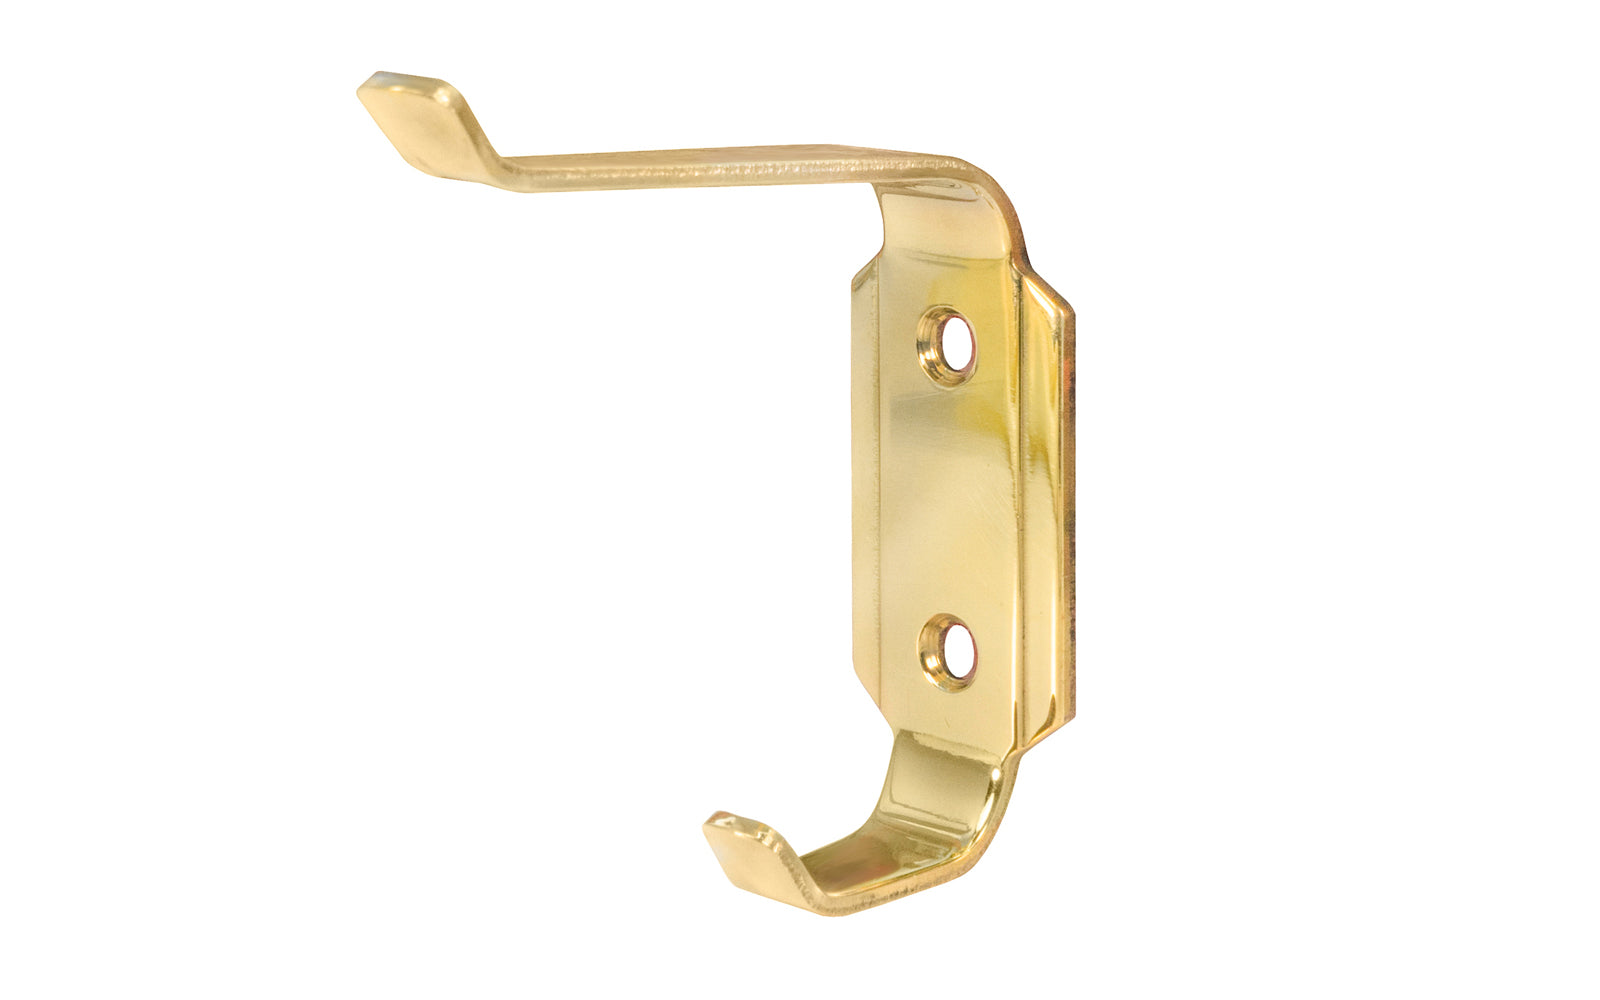 A retro looking & attractive Art-Deco style unlacquered brass hook. Made of quality solid brass material, this double hook is great for use in hallways, kitchens, bathrooms, hall trees, bedrooms, & many other places. Designed in the 1930's, Streamline, Machine Age, Art Deco style of hardware. 2-3/8